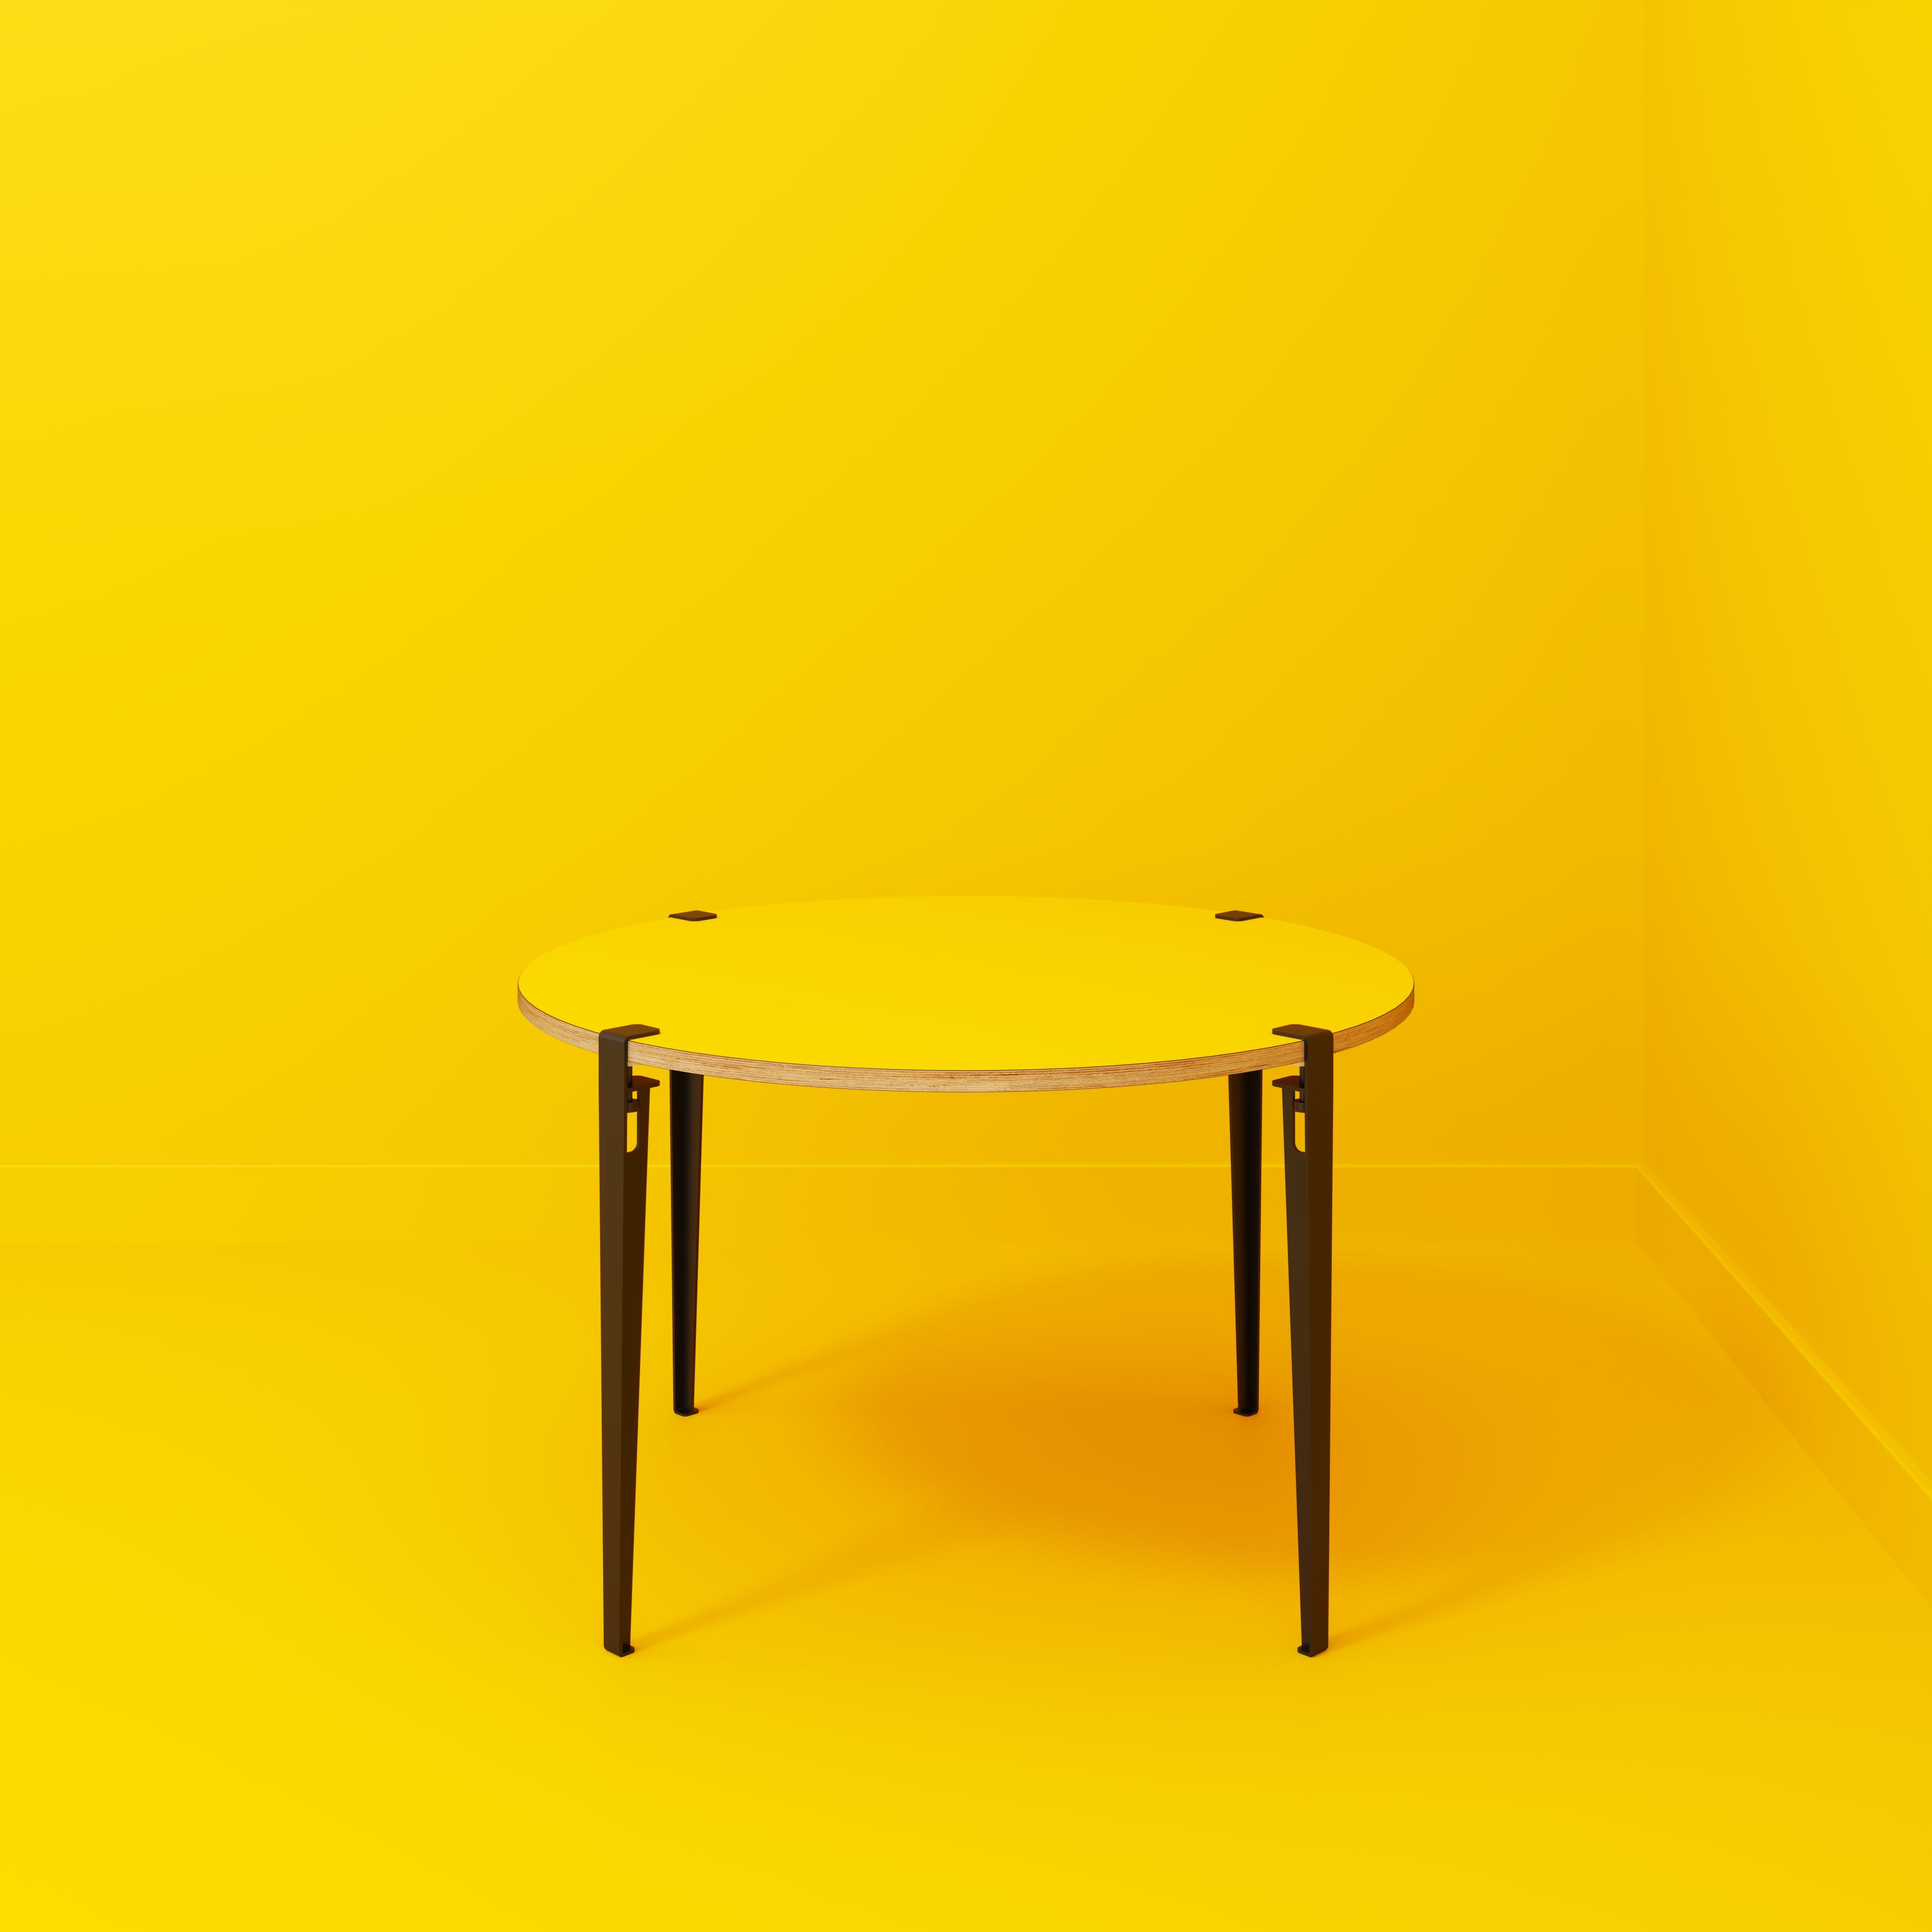 Round Table with Black Tiptoe Legs - Formica Chrome Yellow - 1200(dia) x 750(h)